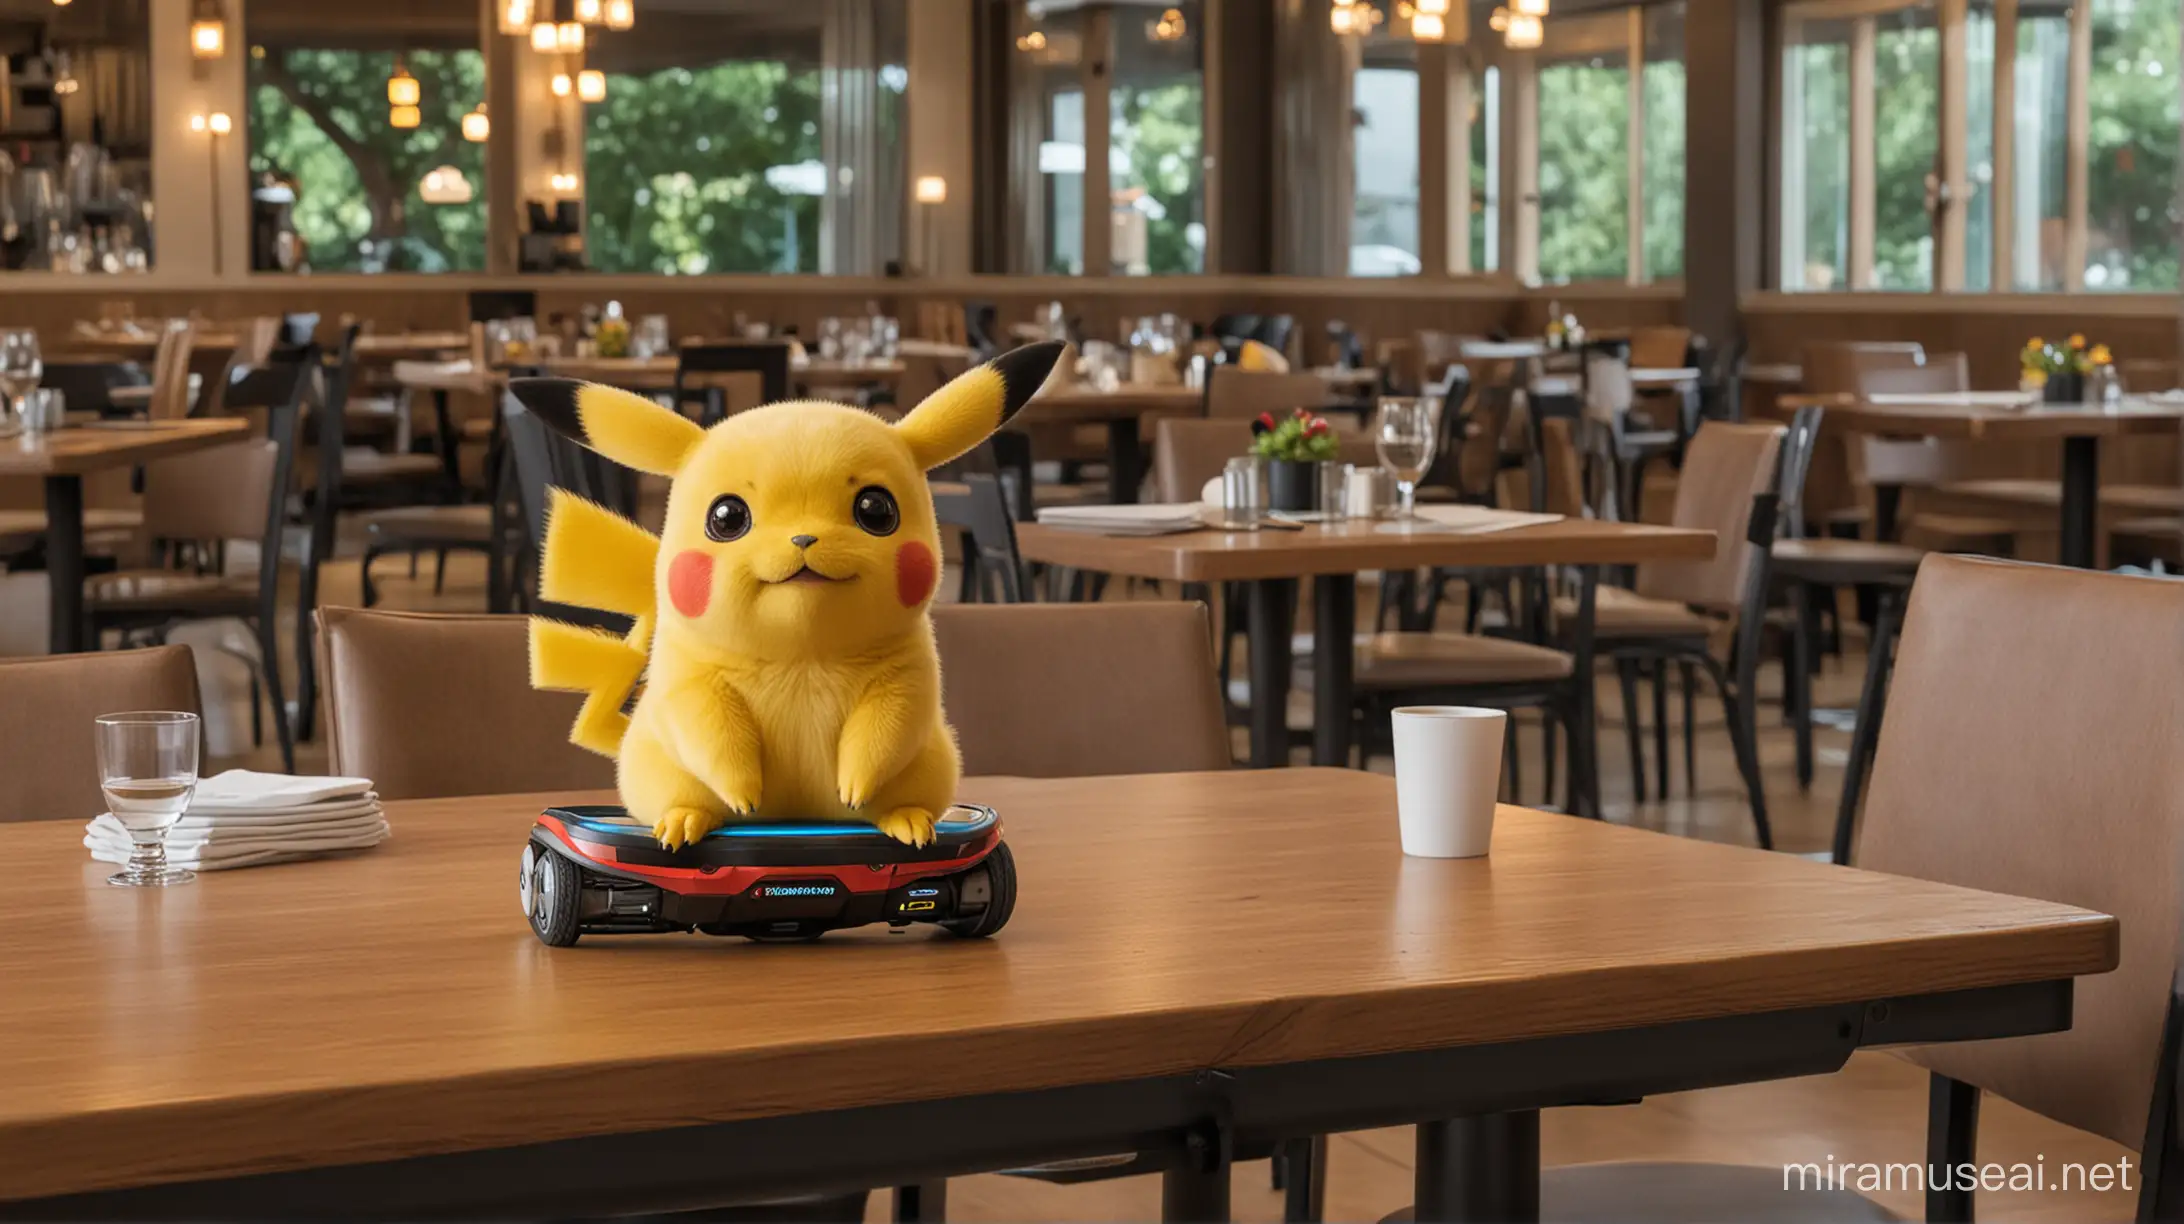 Pikachu with Hoverboard Enjoying a Meal at the Restaurant